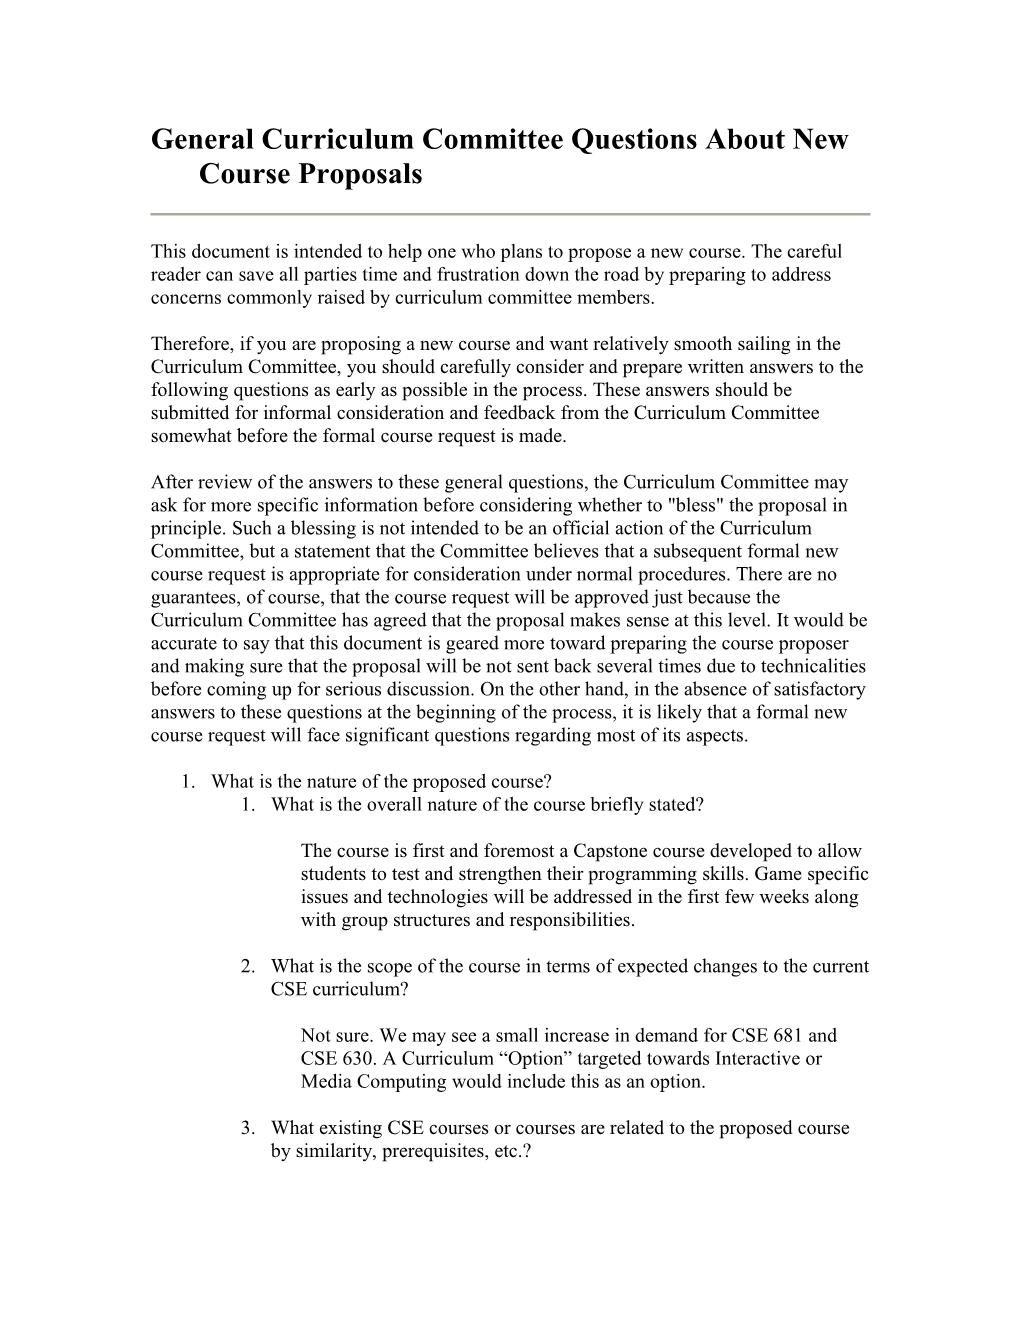 General Curriculum Committee Questions About New Course Proposals